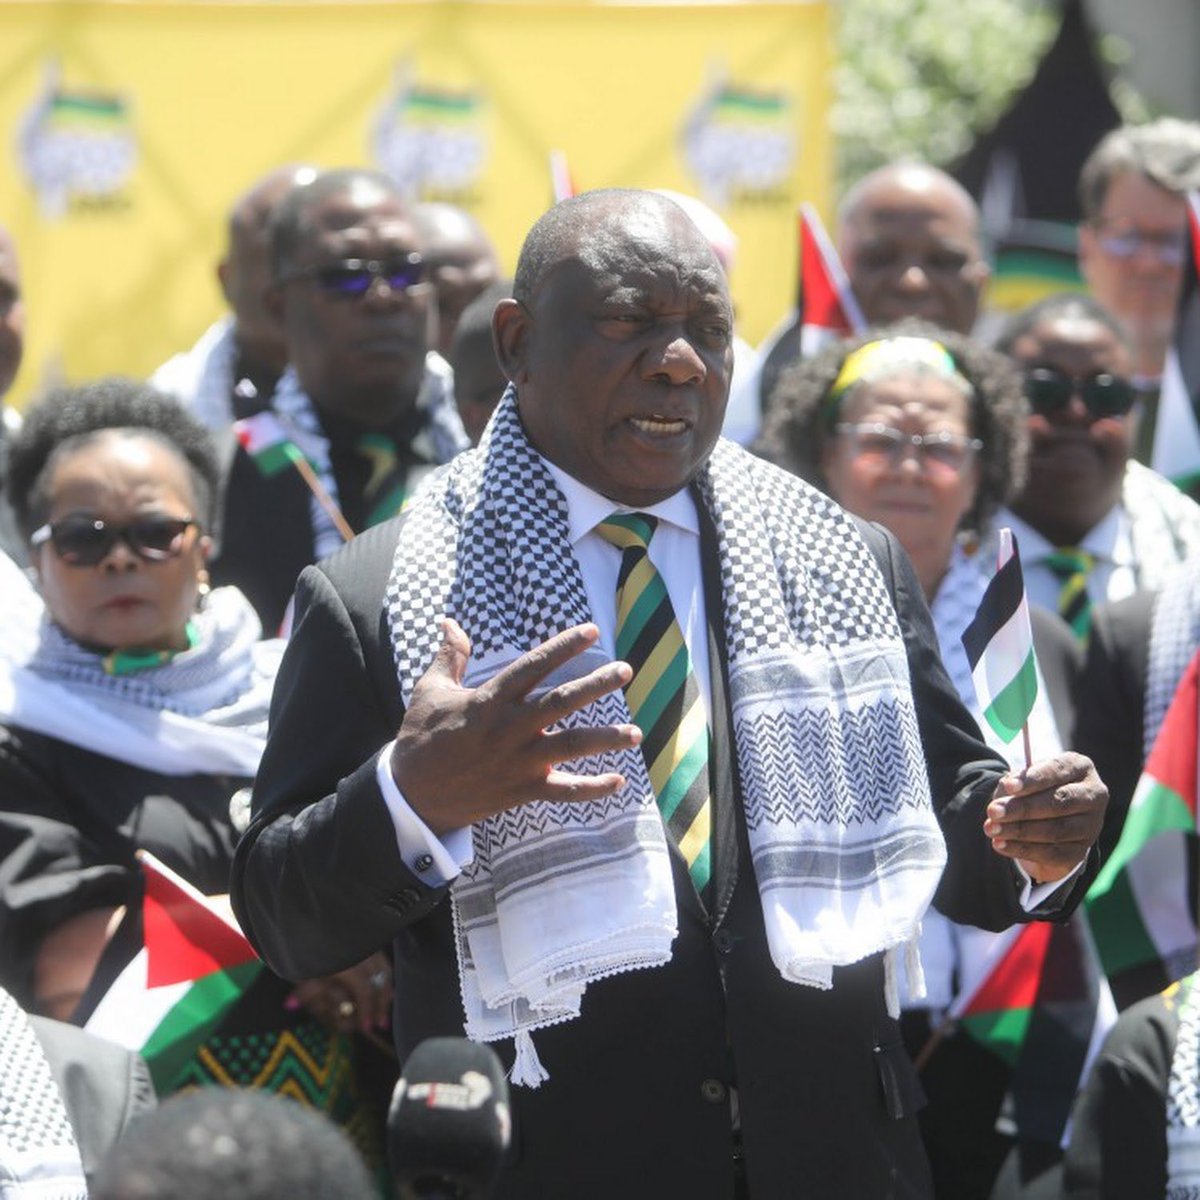 BREAKING: South Africa has declared it will 'withdraw all its diplomats in Tel Aviv' in protest against the genocidal war against the Palestinian people. President Ramaphosa had already committed to be in solidarity with the Palestinian struggle.